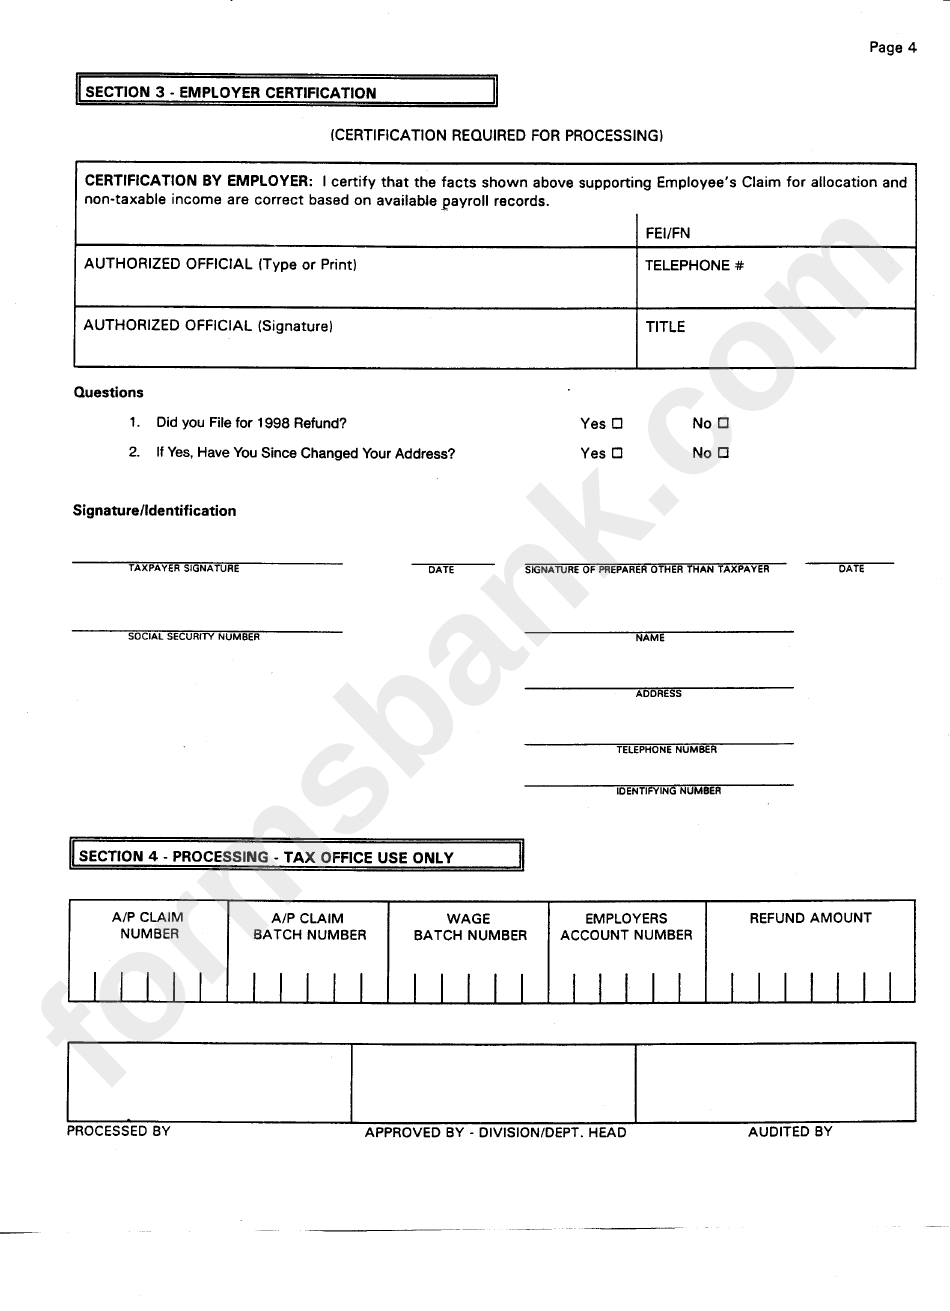 Form Wcwt-5 - Application For Refund Of Wilmington City Wage Rax - 1999